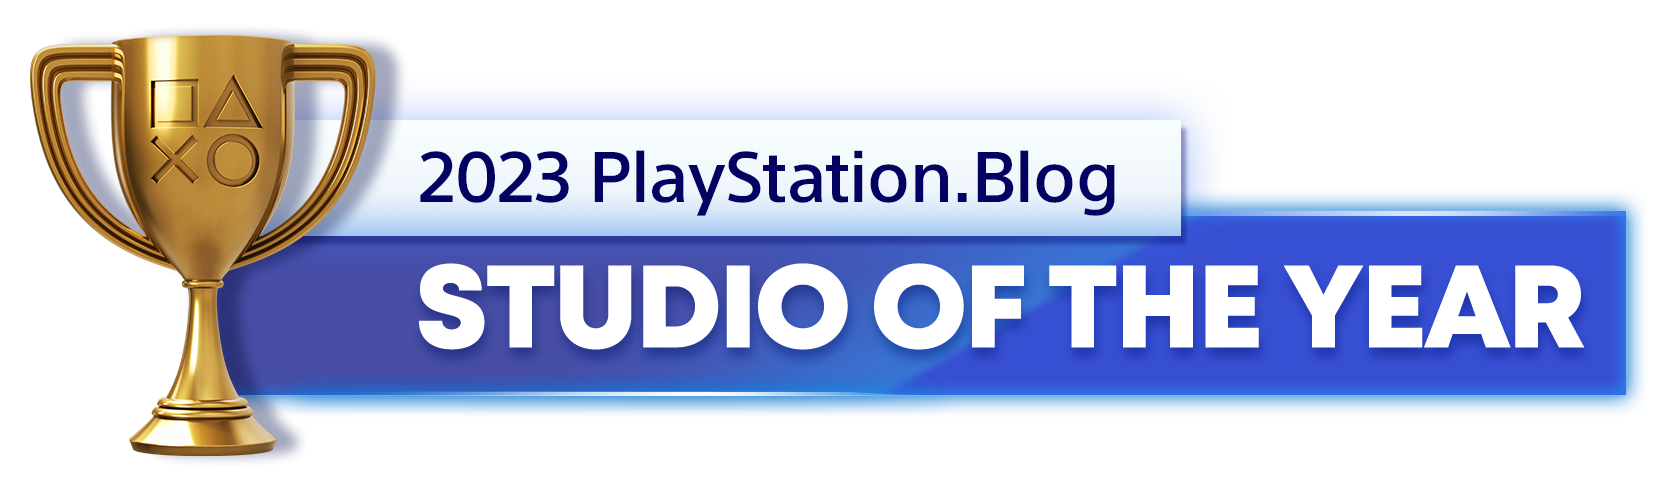  "Gold Trophy for the 2023 PlayStation Blog Studio of the Year Winner"